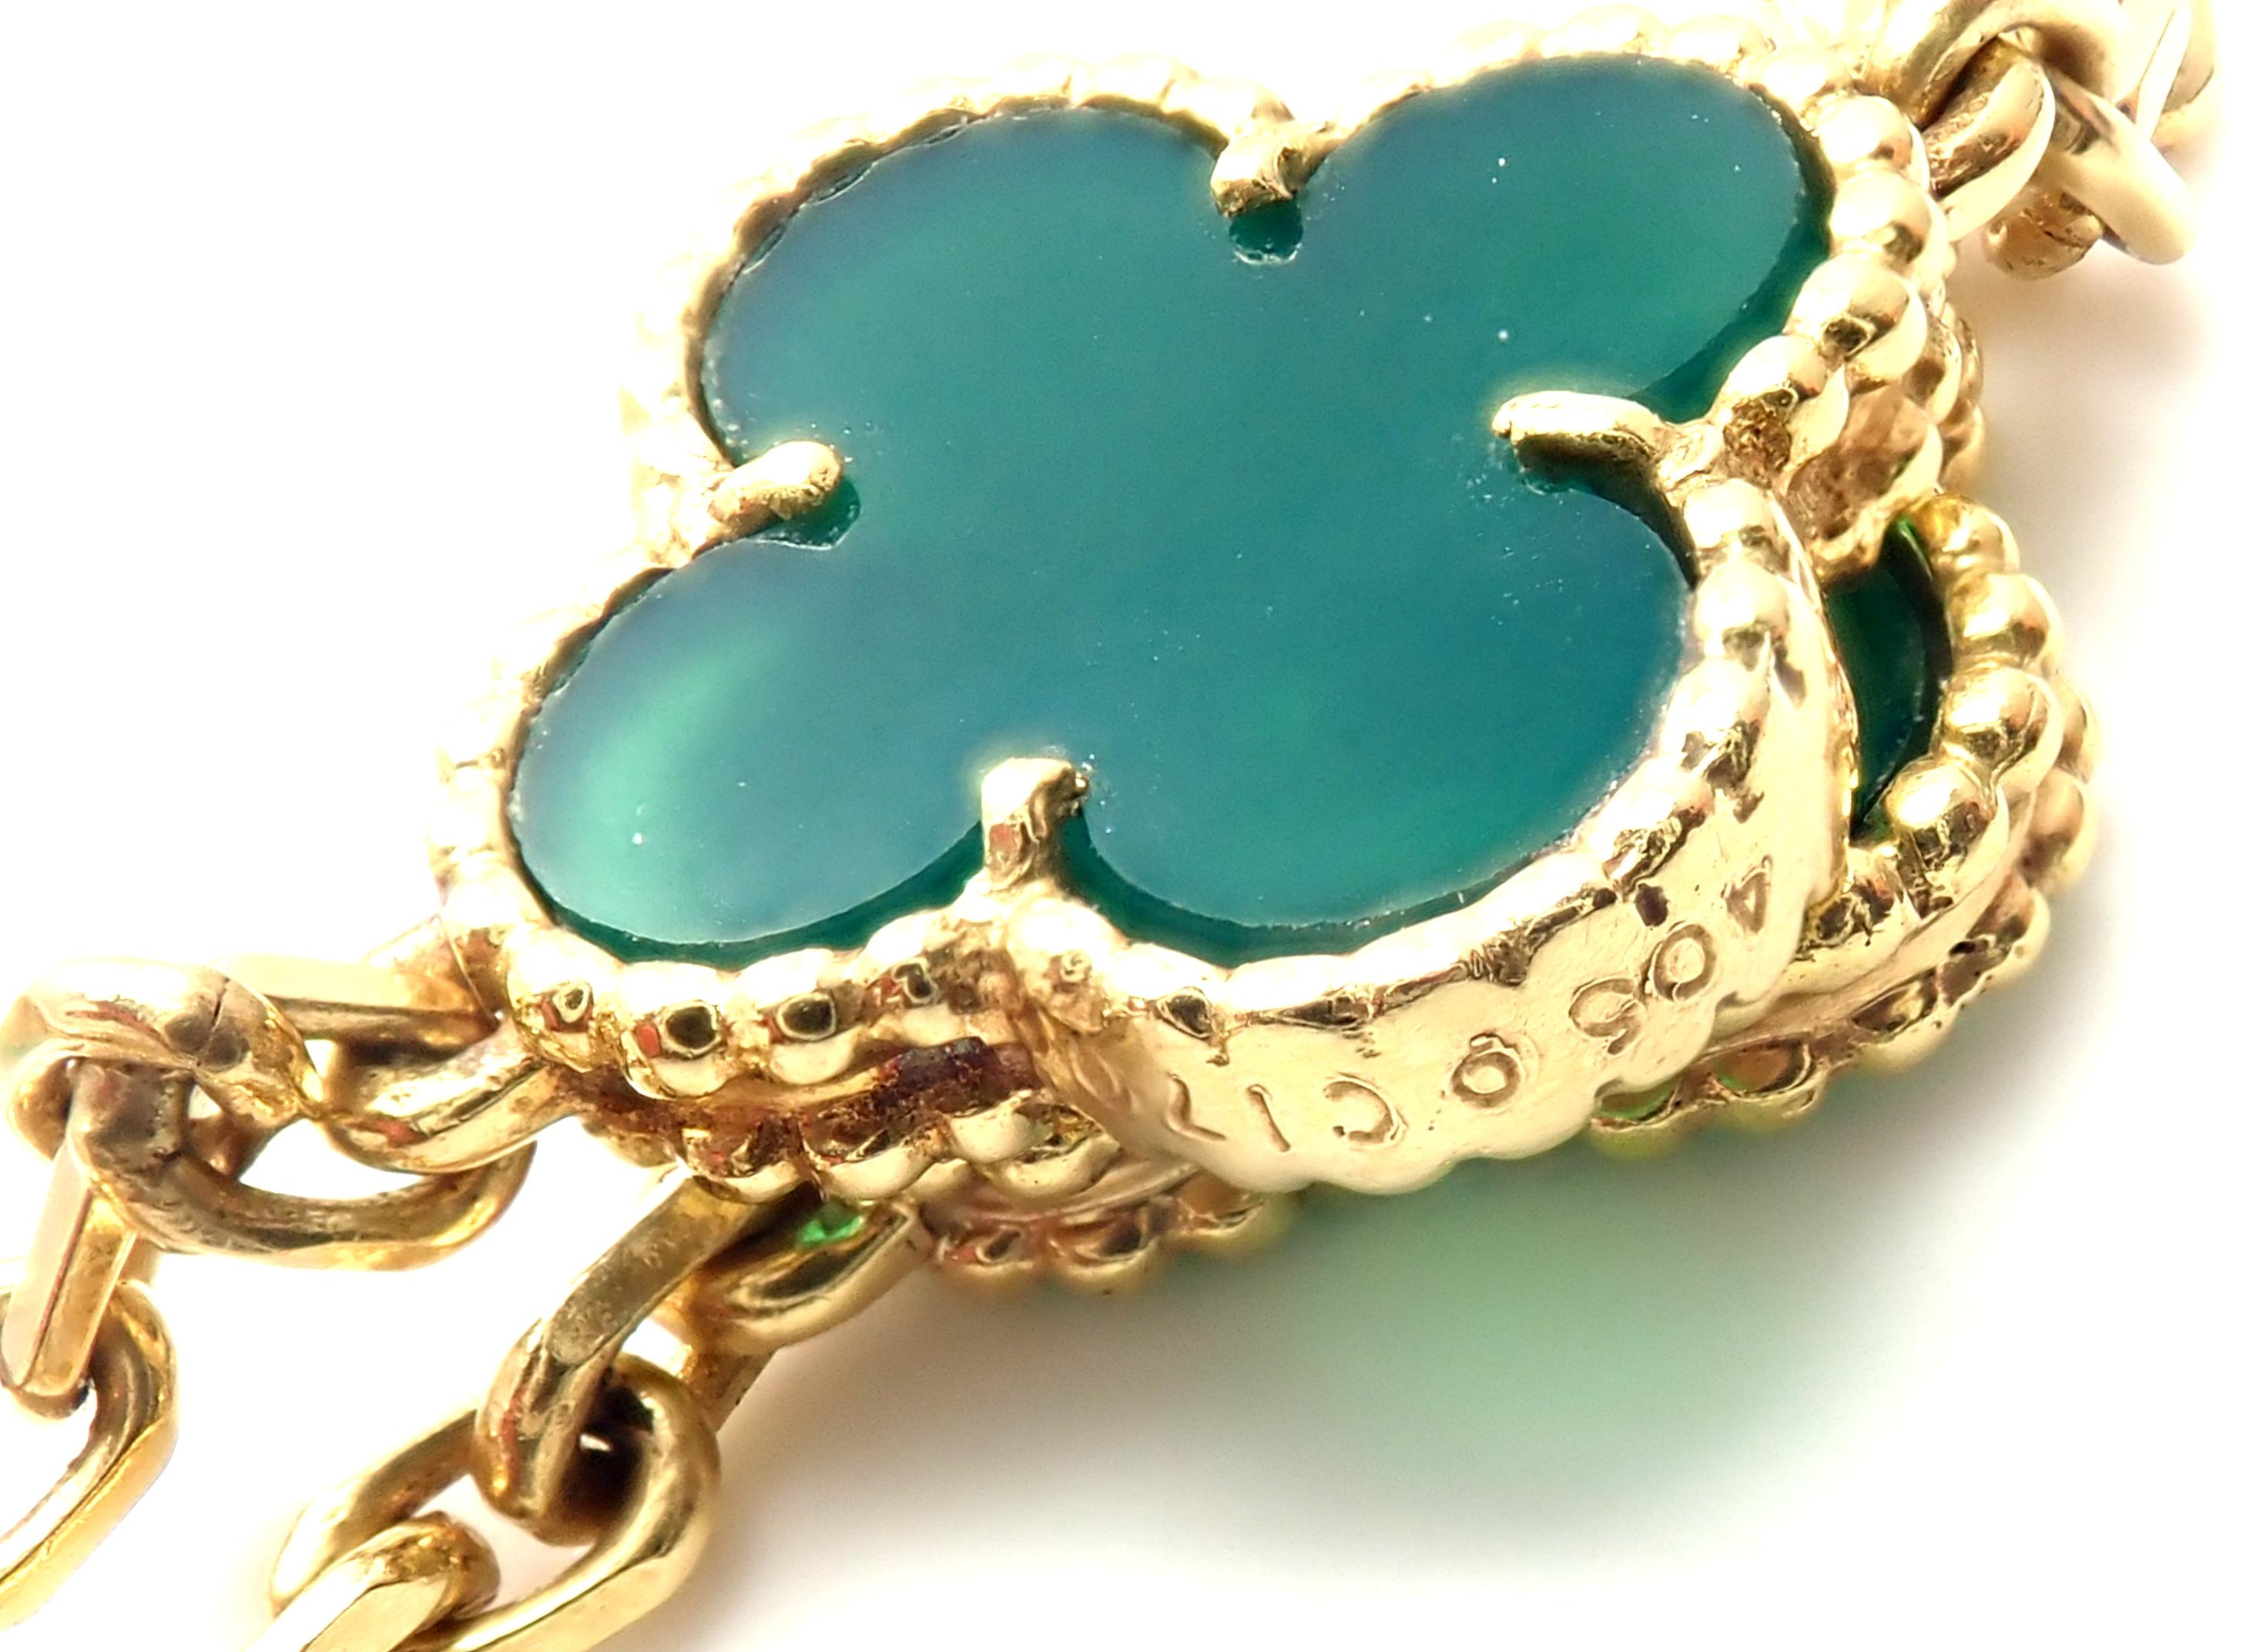 18k Yellow Gold Vintage 20 Alhambra Chrysoprase Green Chalcedony Necklace by 
Van Cleef & Arpels.
With 20 motifs of chrysoprase green chalcedony alhambra stones 15mm each
*** This is a rare, very collectible, antique Van Cleef & Arpels Chrysoprase